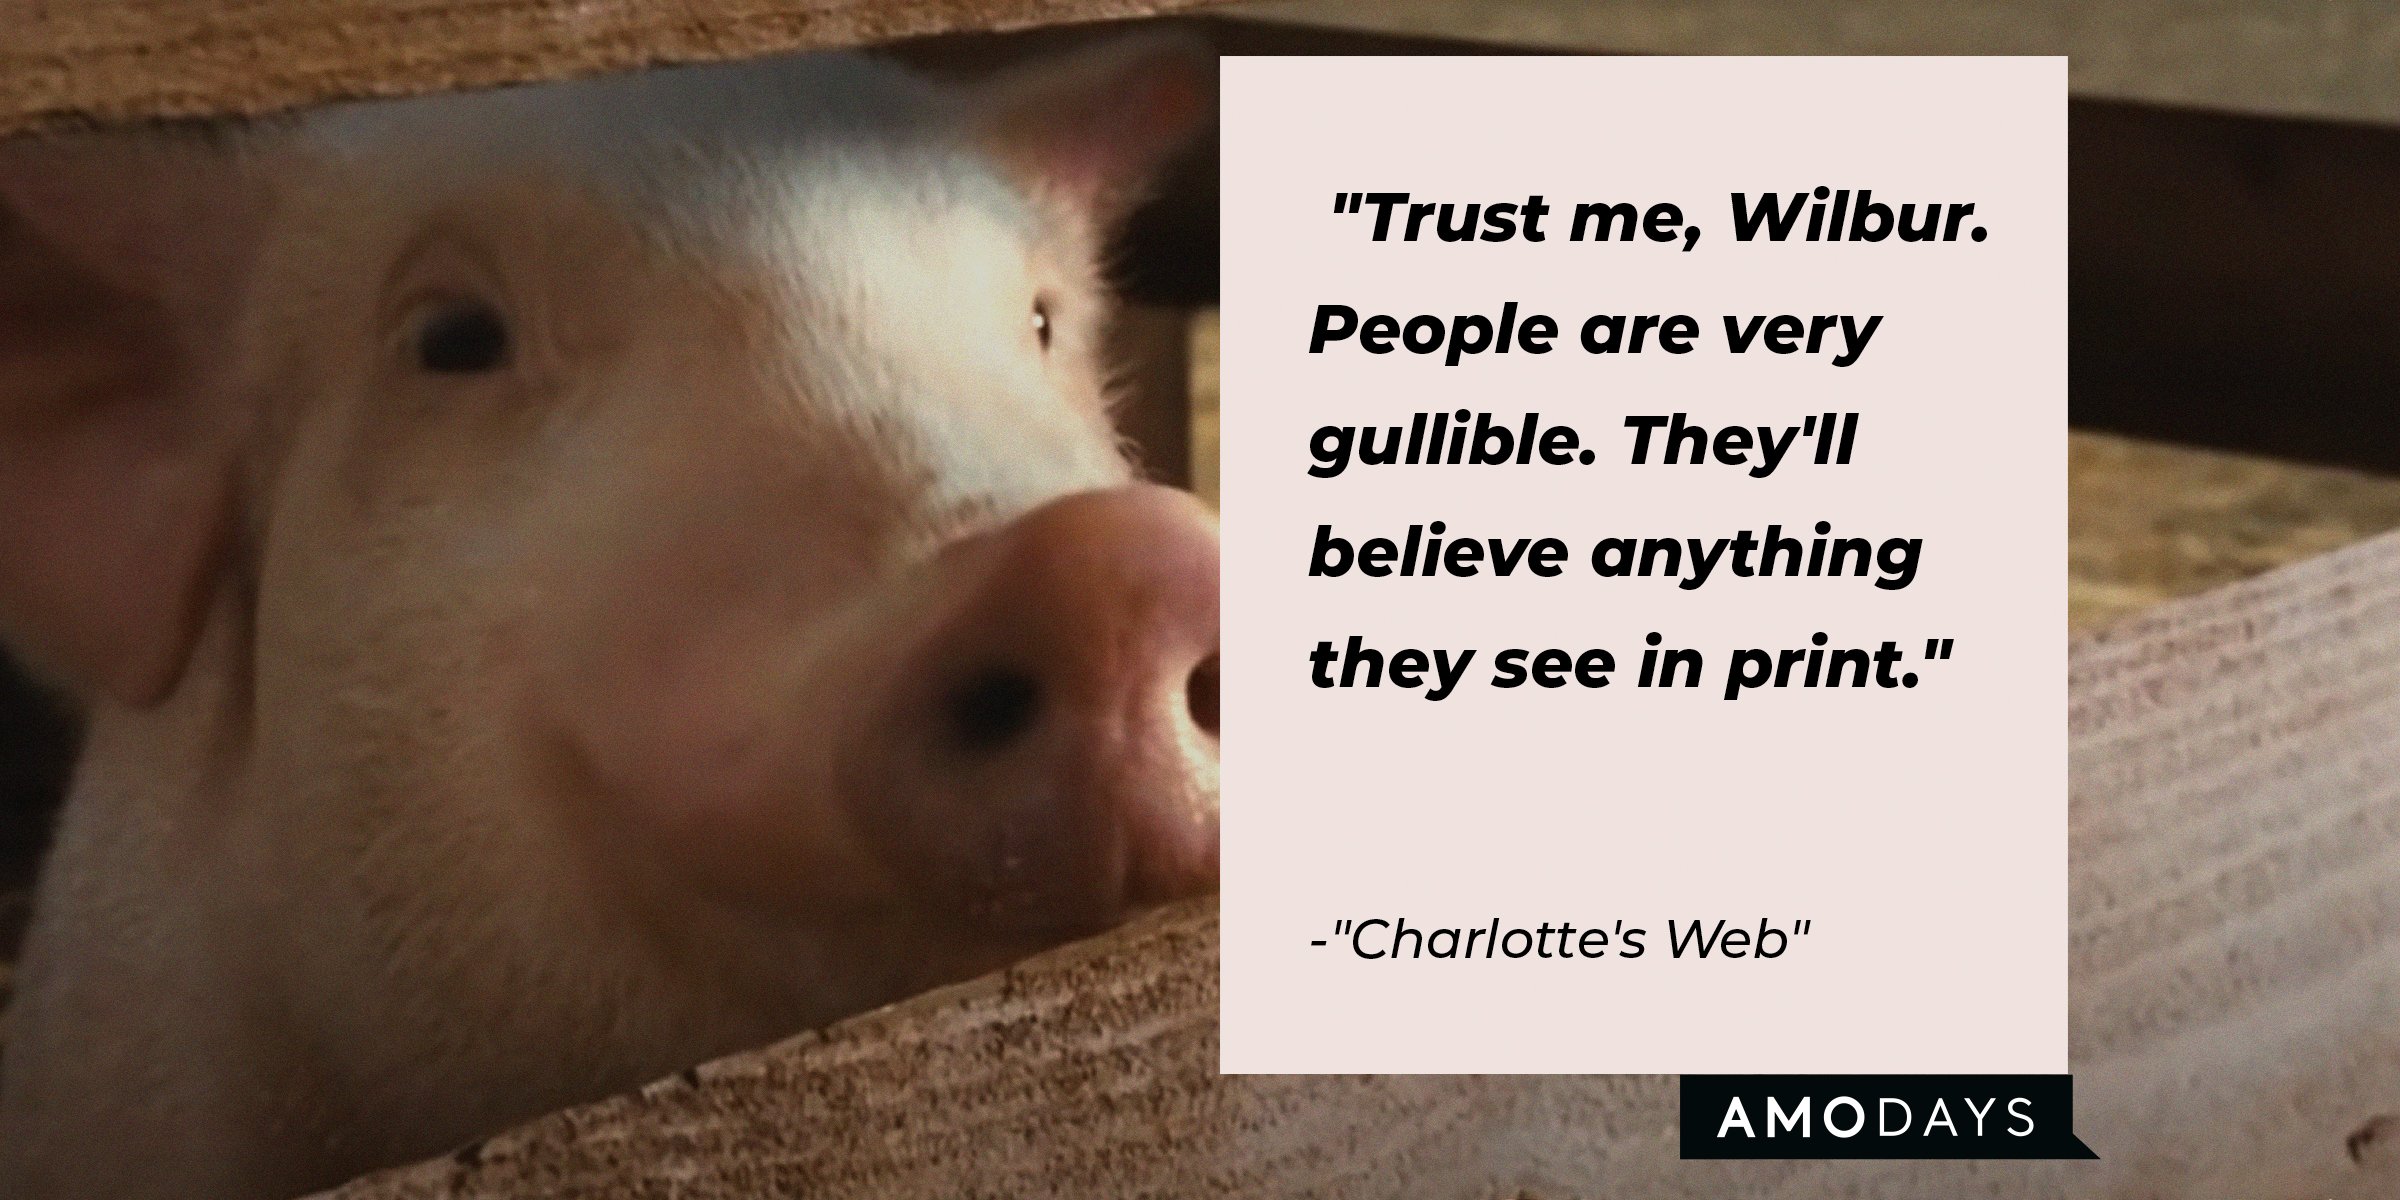 Source: Facebook.com/CharlottesWebMovie | Wilbur's pig character with the quote: "Trust me, Wilbur. People are very gullible. They'll believe anything they see in print."